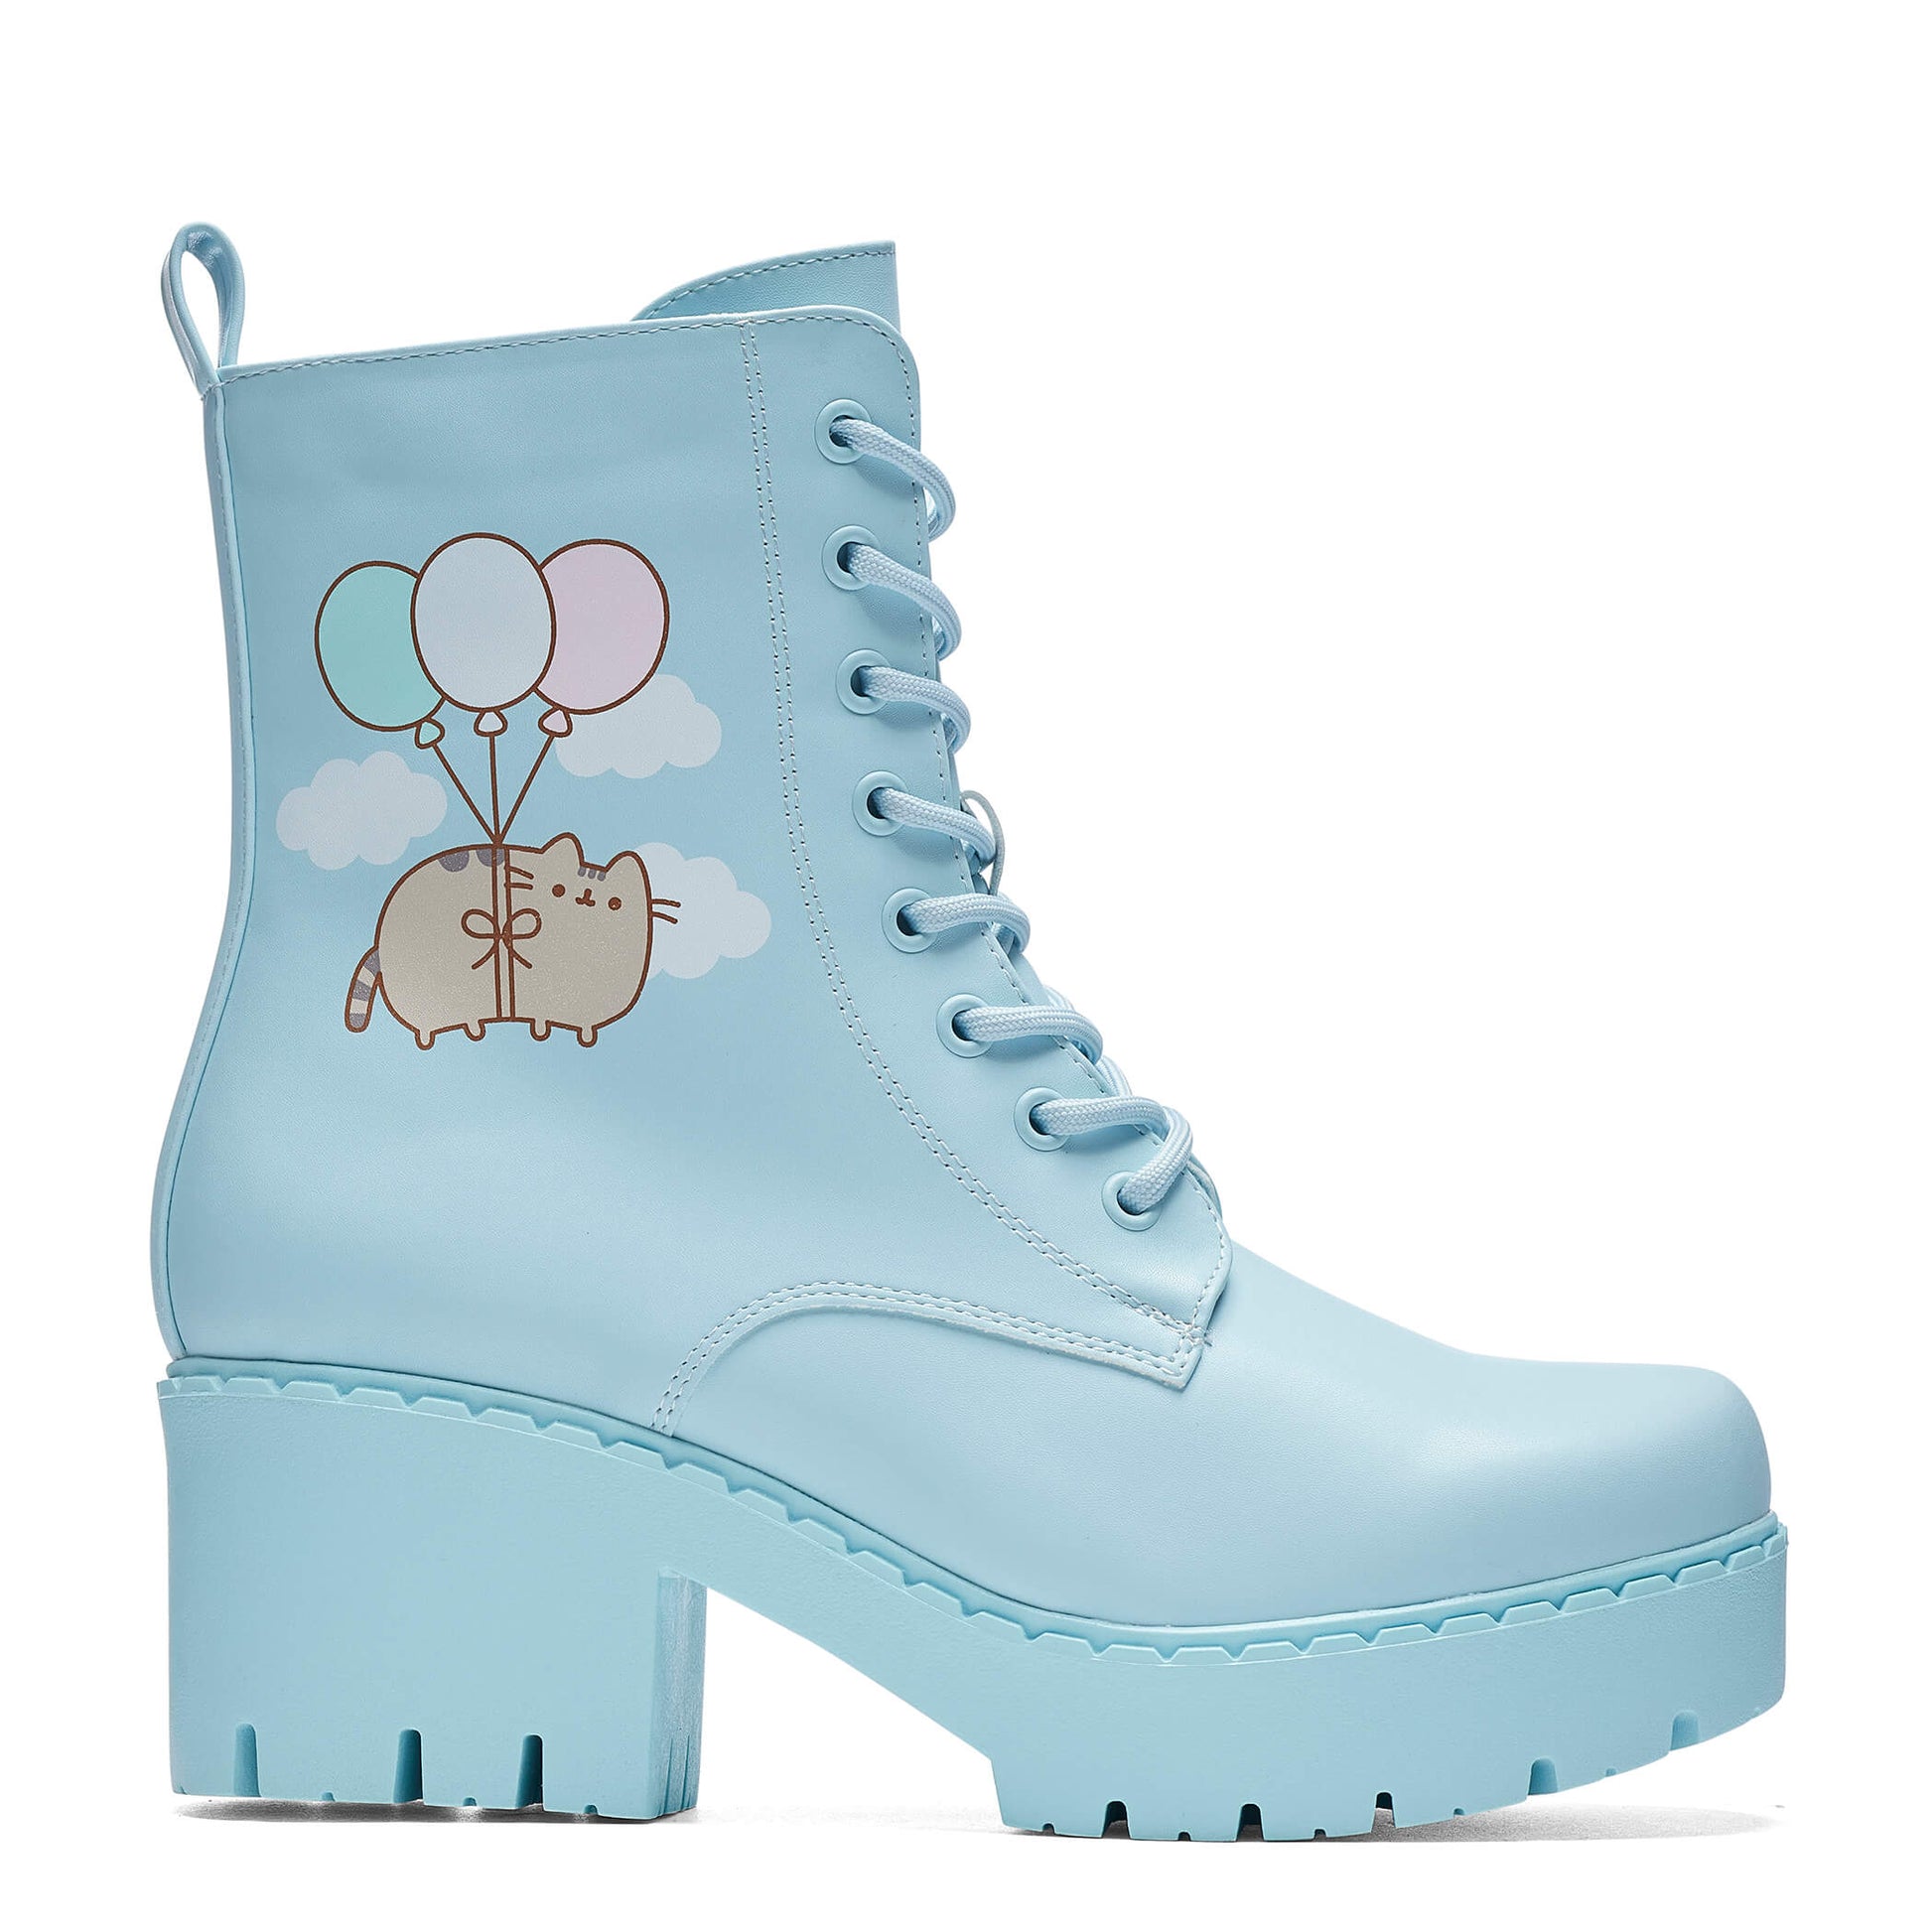 Flying Pusheen Sky Boots - Ankle Boots - KOI Footwear - Blue - Side View